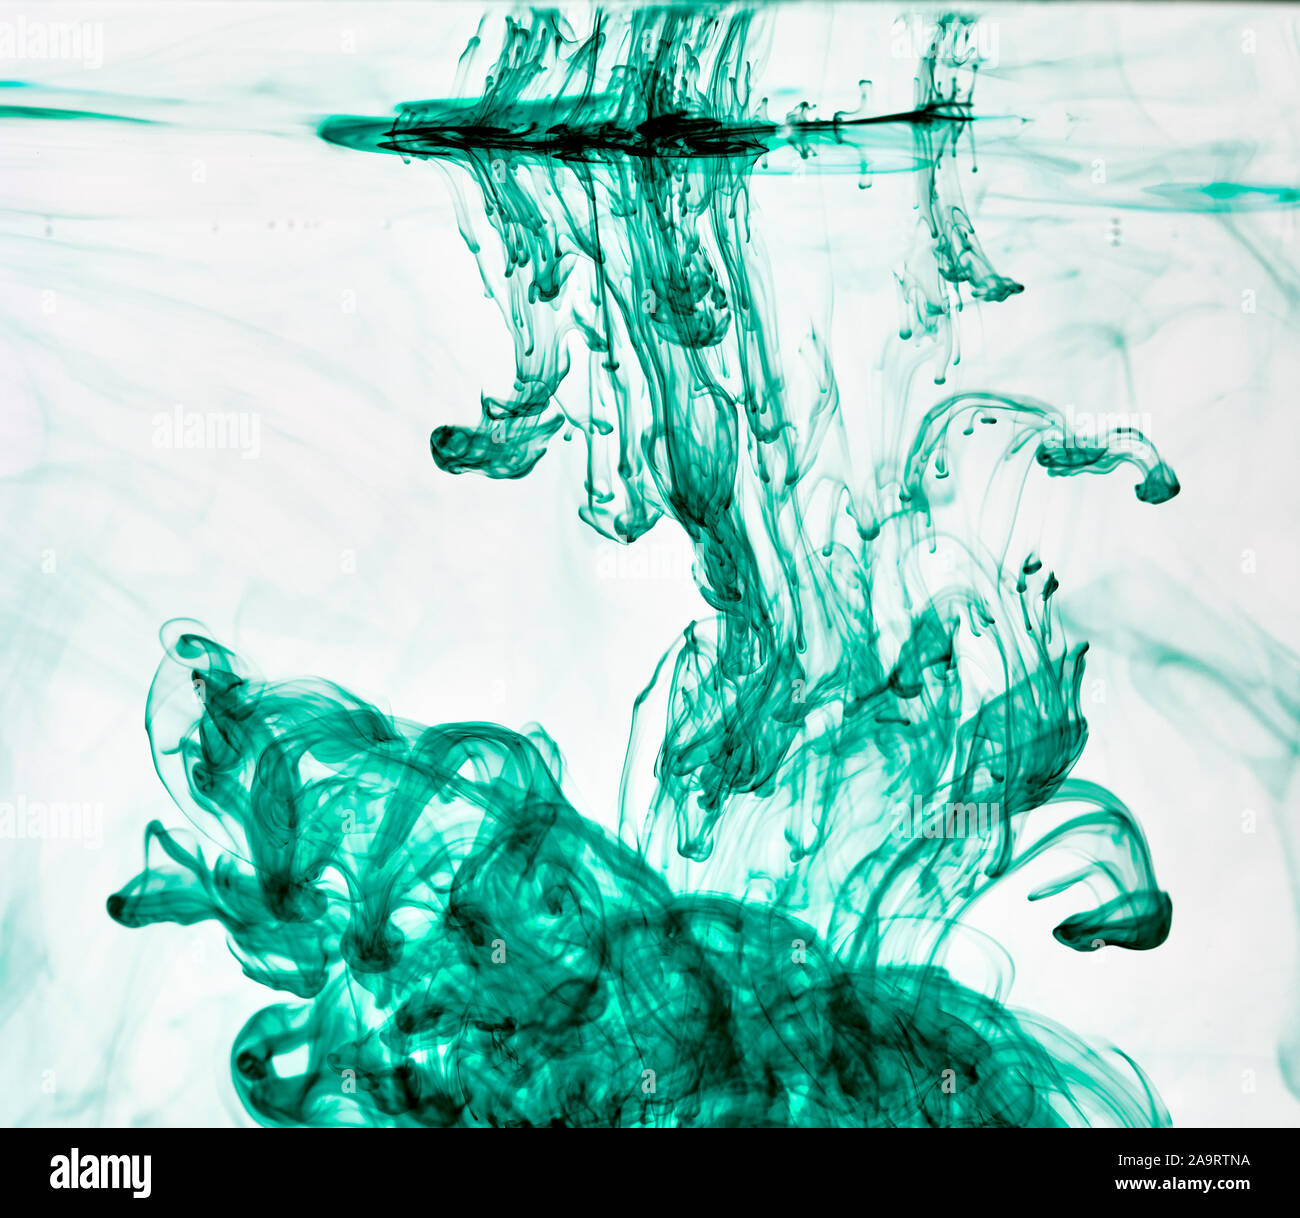 The colorful ink into the water while in motion, Abstract, background ...